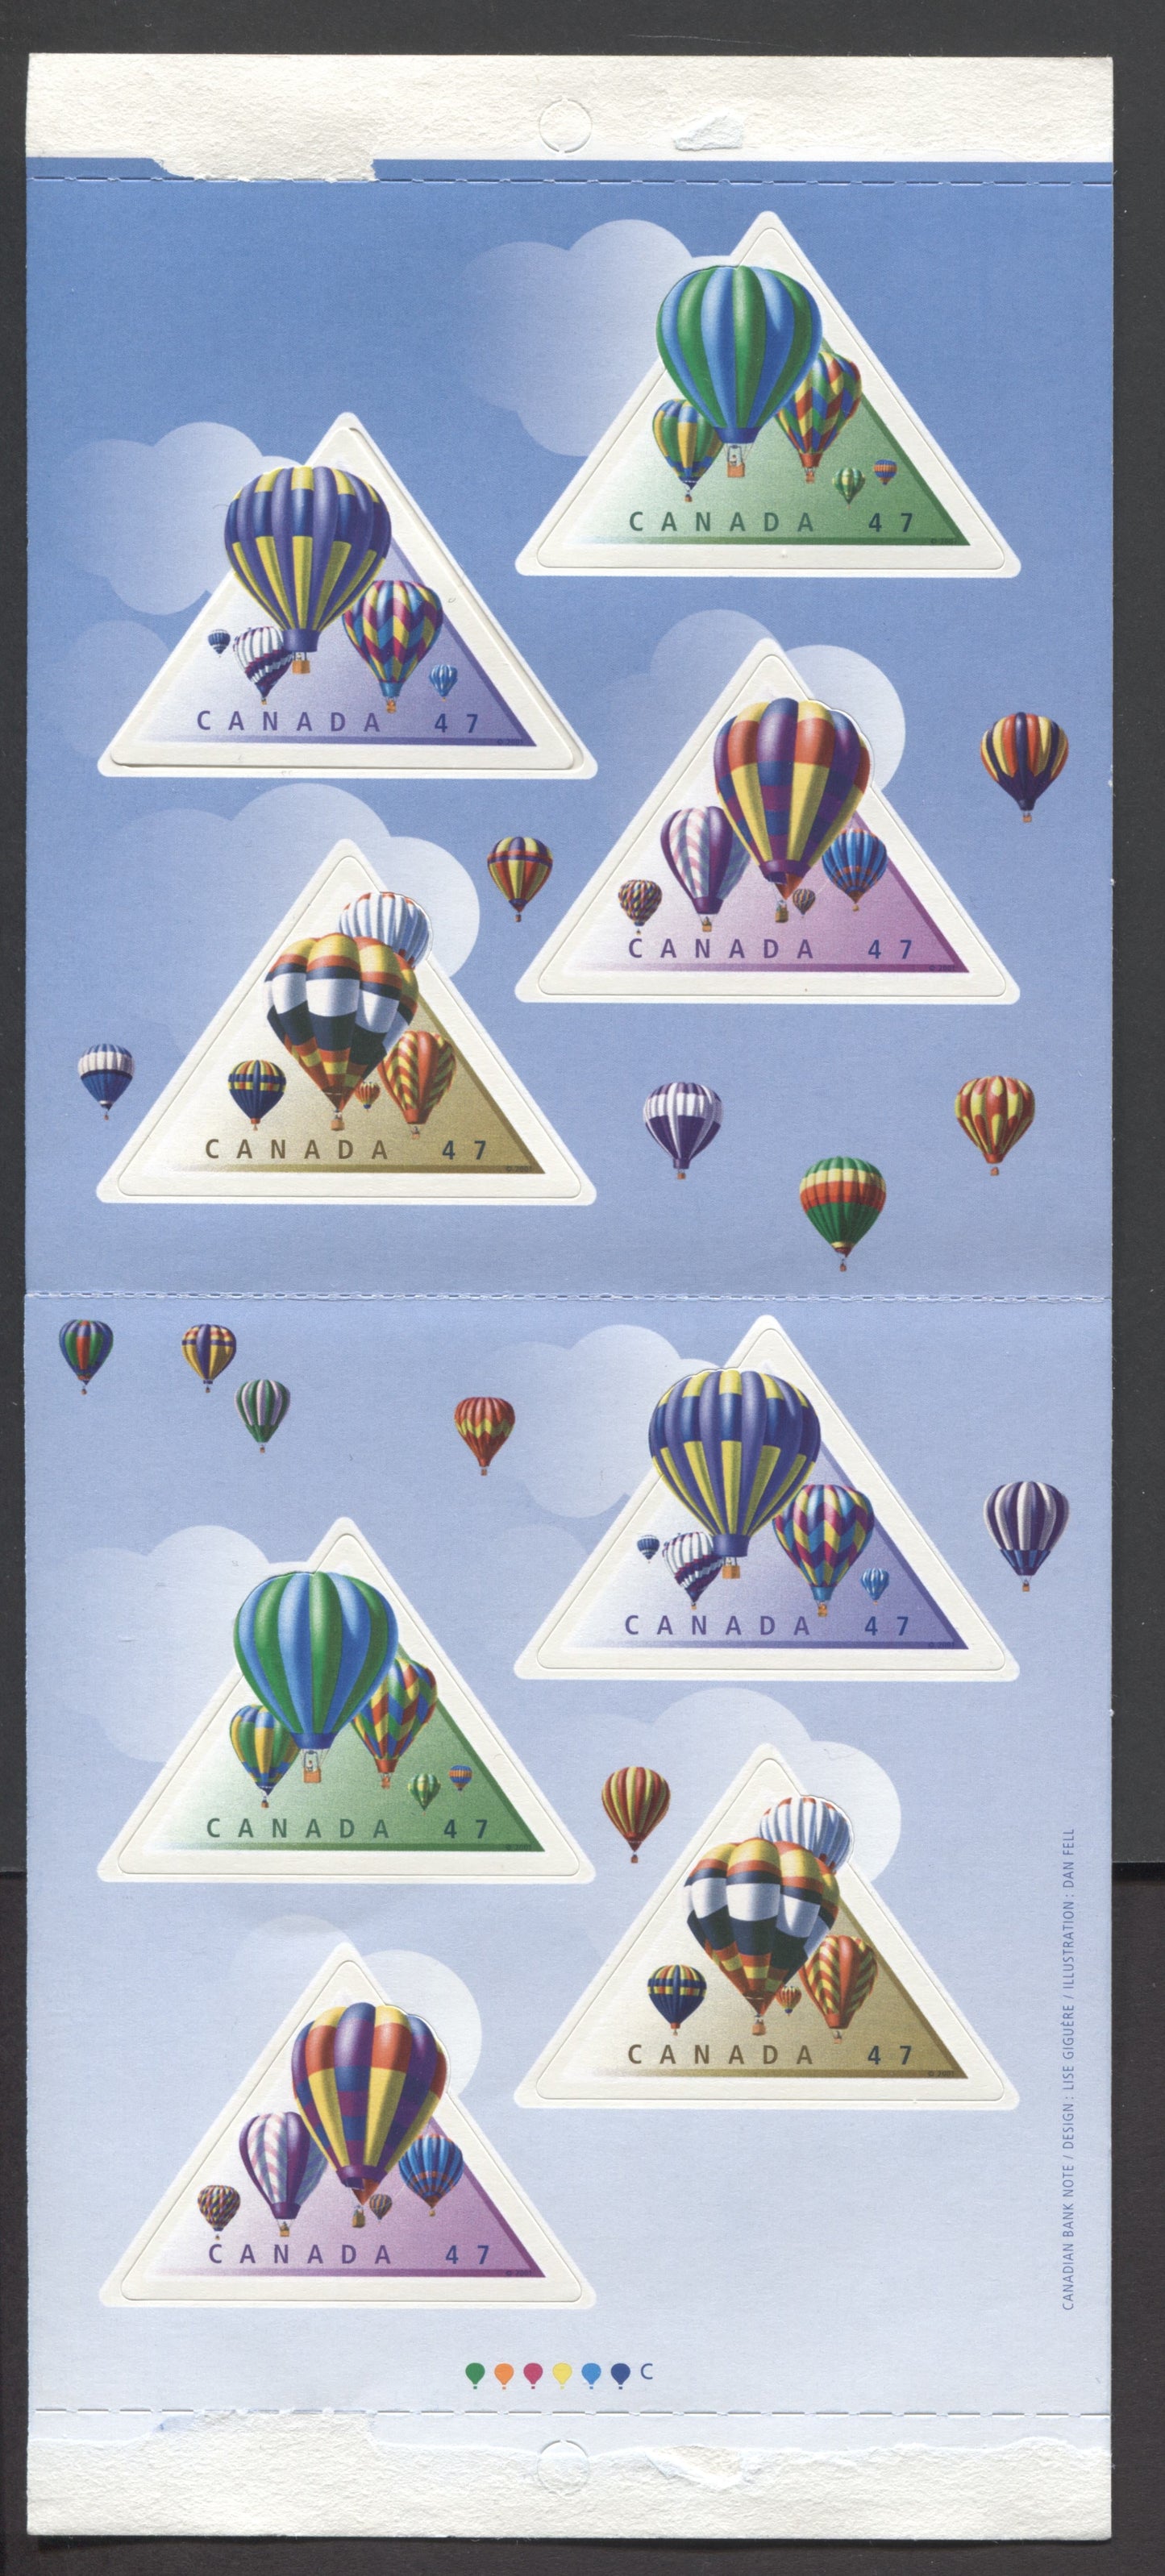 Canada #BK247a-i 2001 Hot Air Balloons Issue, Complete $3.76 Booklet, Tullis Russell Coatings Paper, Dead Paper, 4 mm GT-3 Tagging